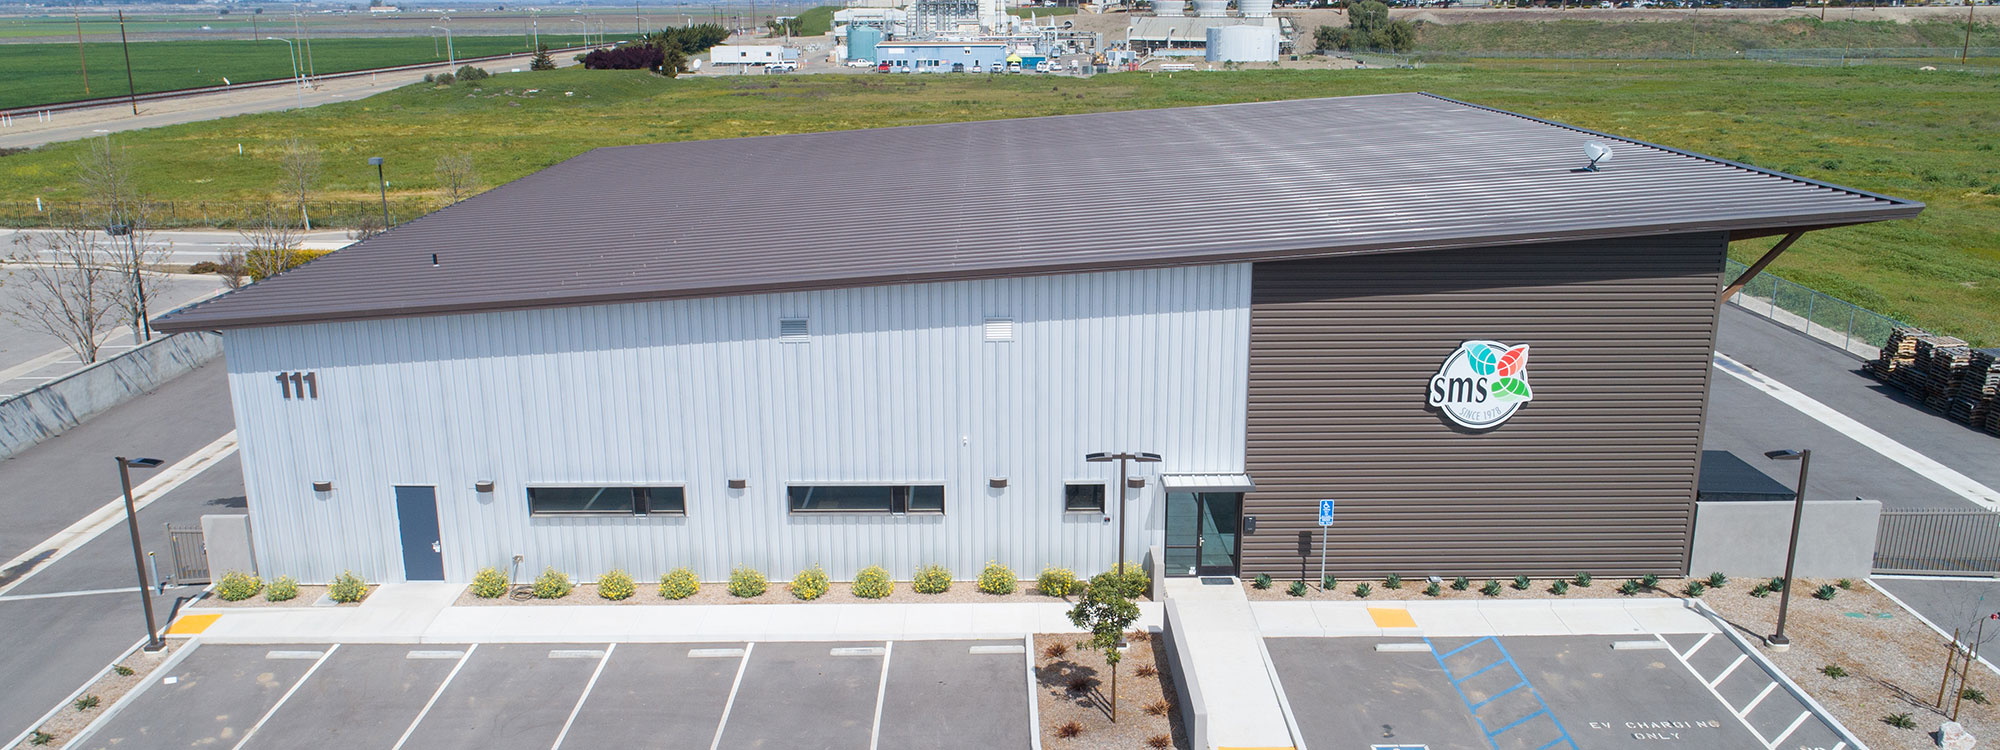 Santa Maria Seed, King City – Seed Processing Facility - Pre-engineered Metal Building Contractor and Builder - JW Design & Construction